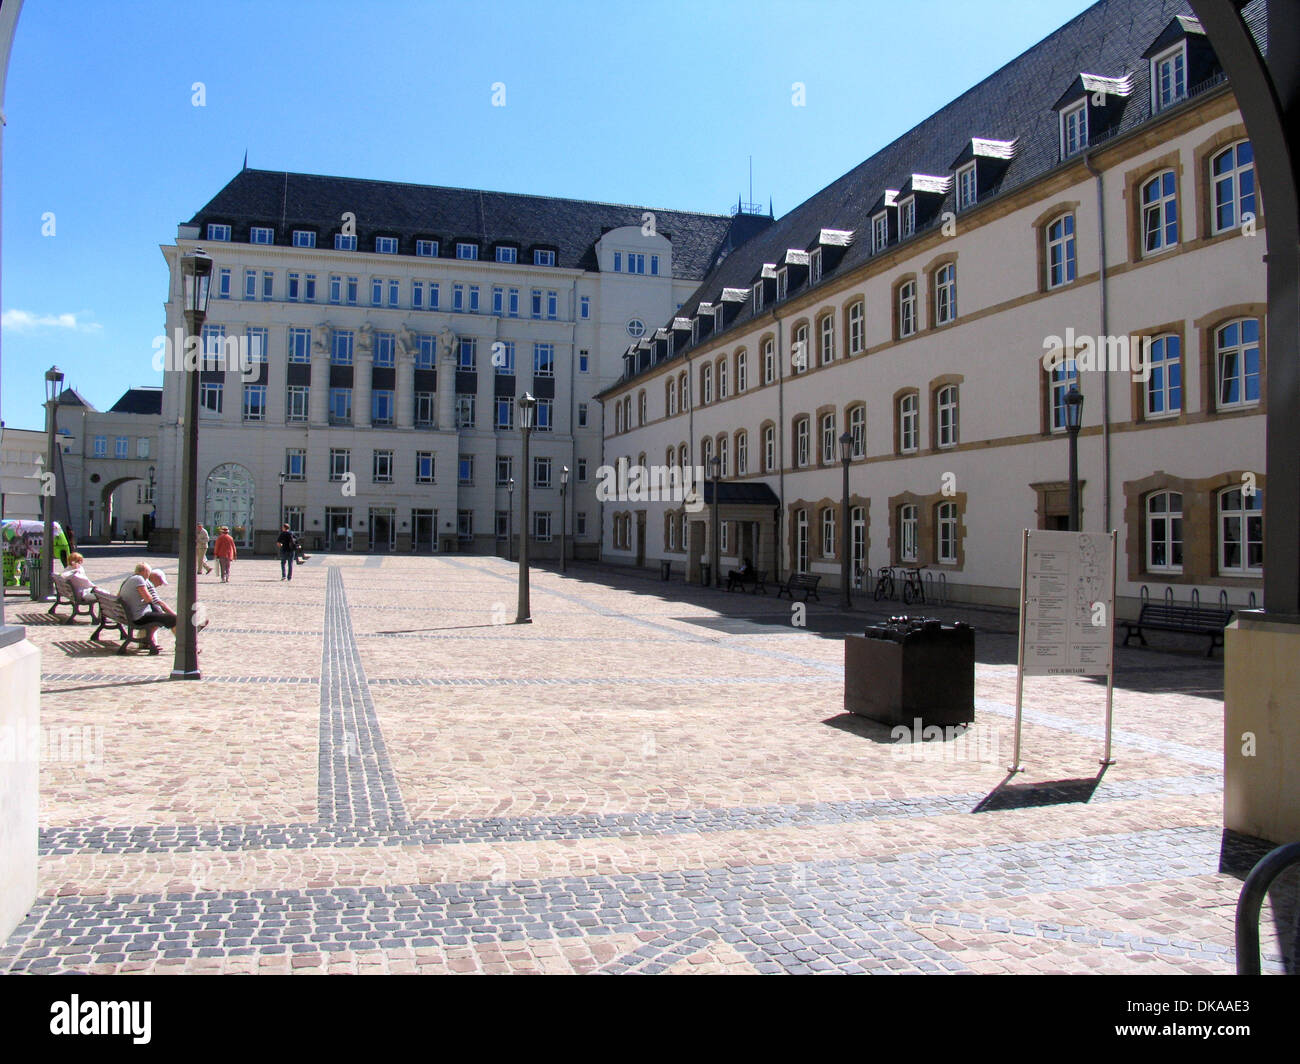 The justice of Luxembourg have their seat in the so-called Cité Judiciaire on the Heilig-Geist-Plateau in Luxembourg City. The social-court, the peace-court, the most upper court of justice, the youth-court and other jurisdictions are there. Photo: Klaus Stock Photo